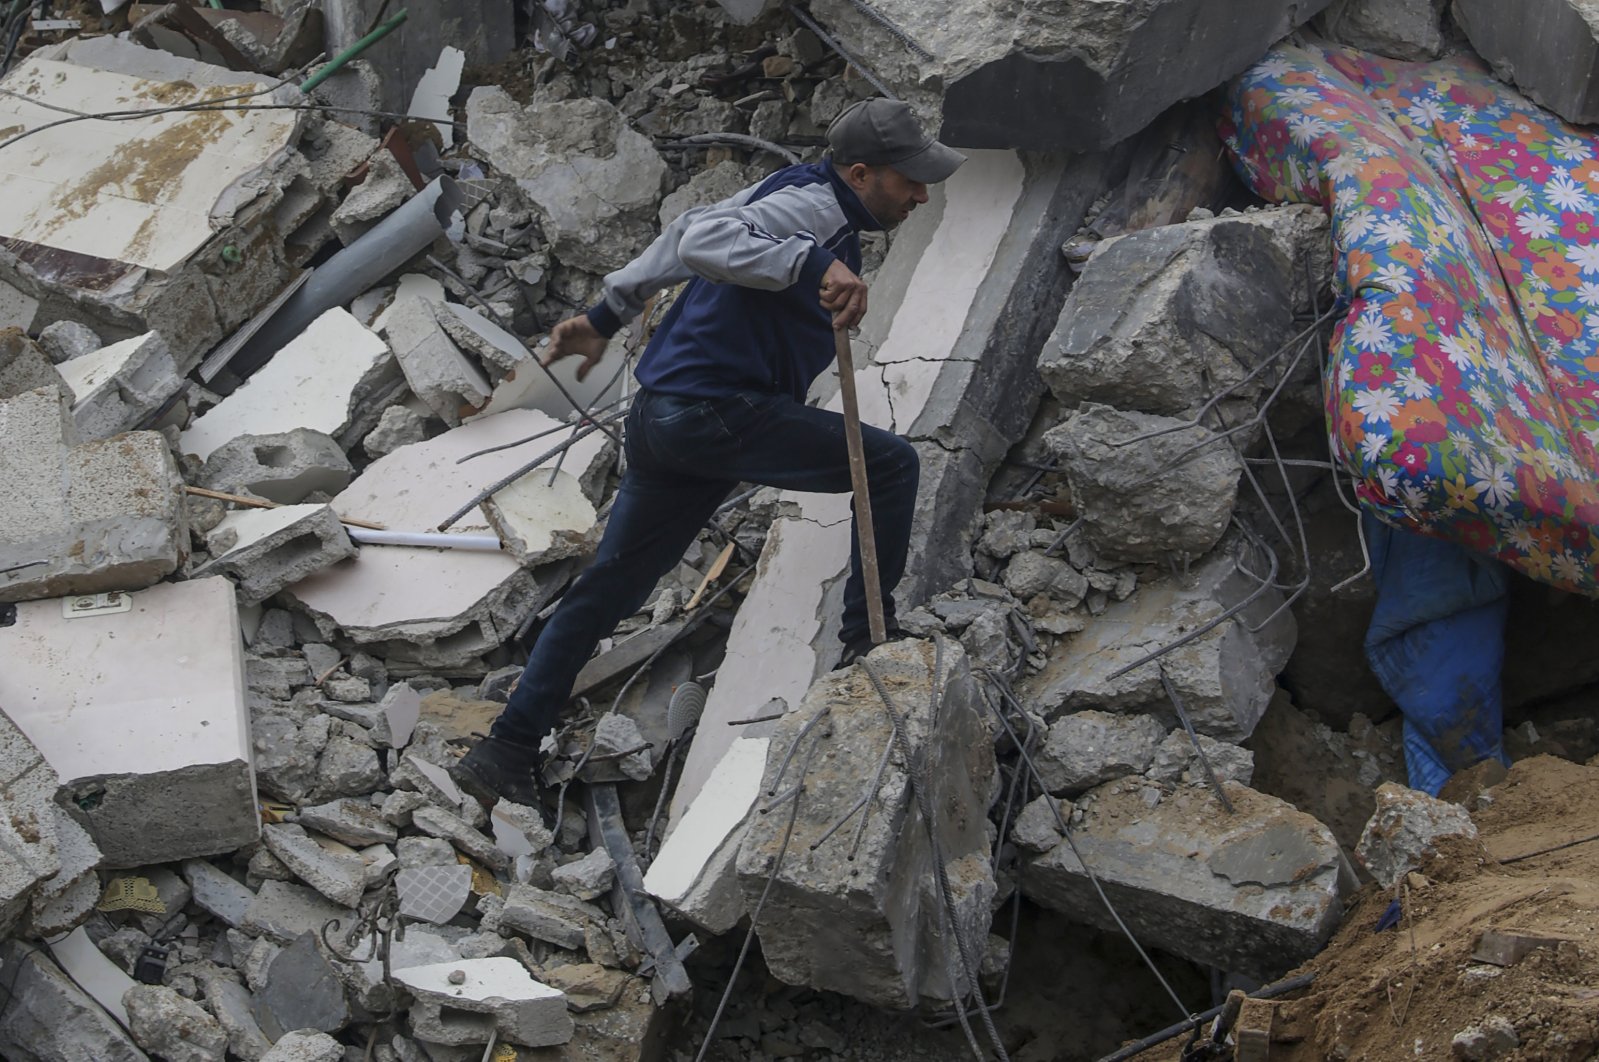 A Palestinian man searches for bodies and survivors among the rubble of a house destroyed in an Israeli airstrike, Deir Al Balah, Gaza, Palestine, Feb. 2024. (EPA Photo)